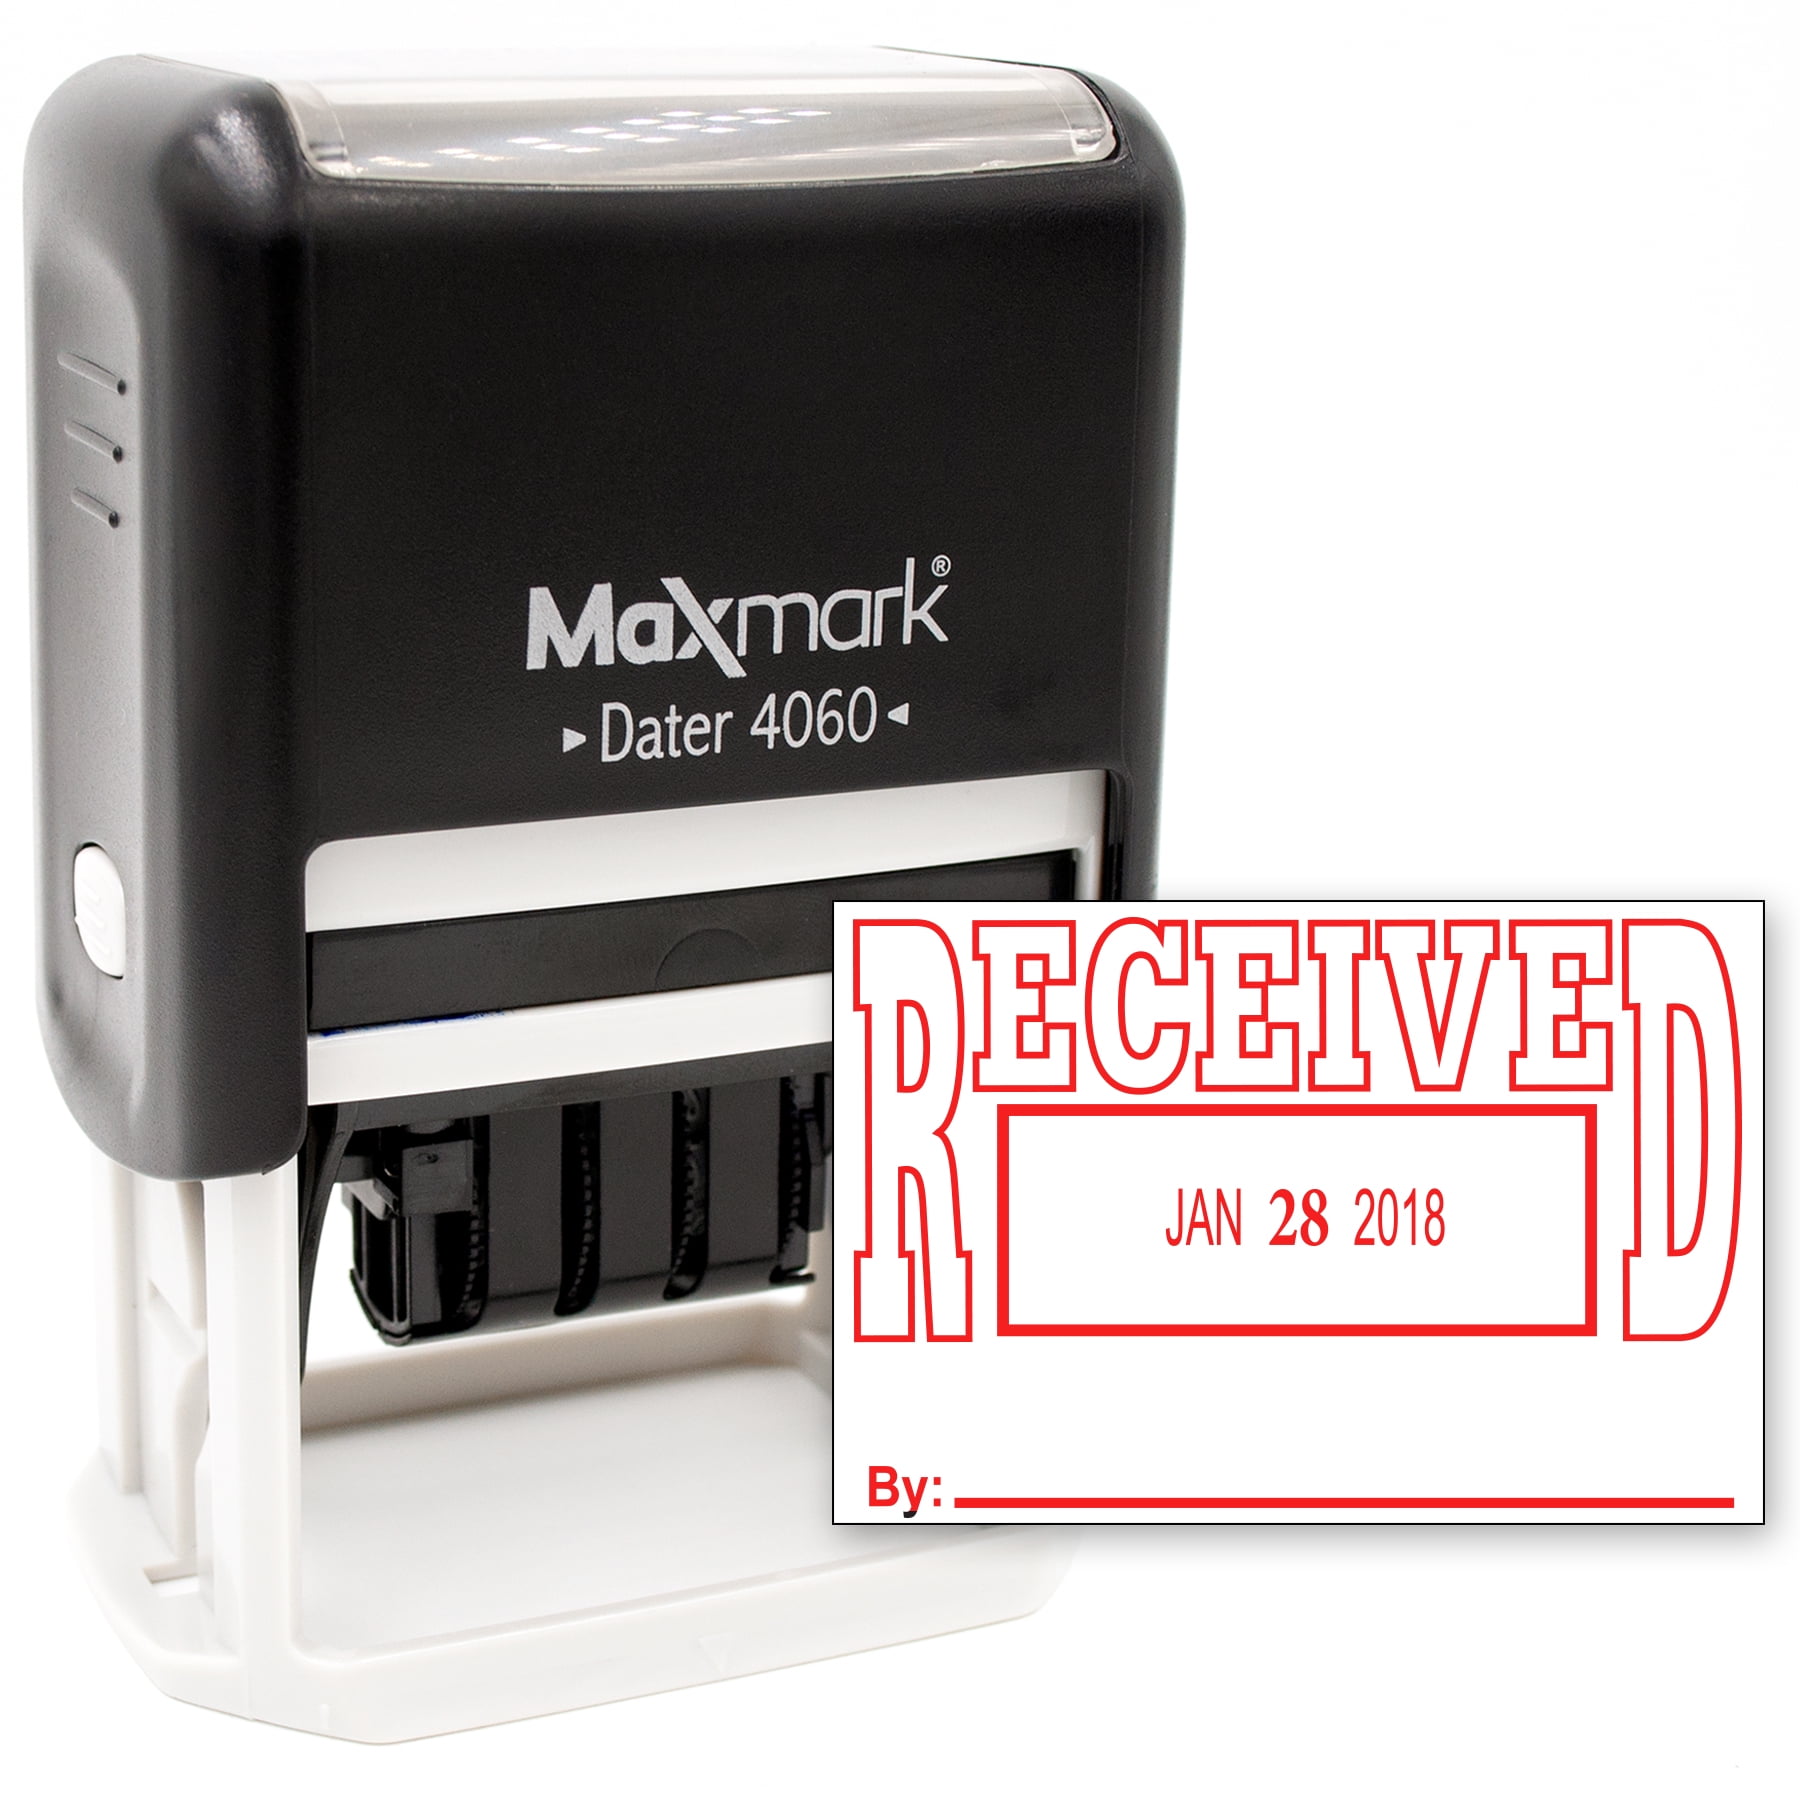 MaxMark Large Date Stamp with RECEIVED Self Inking Date Stamp, Large